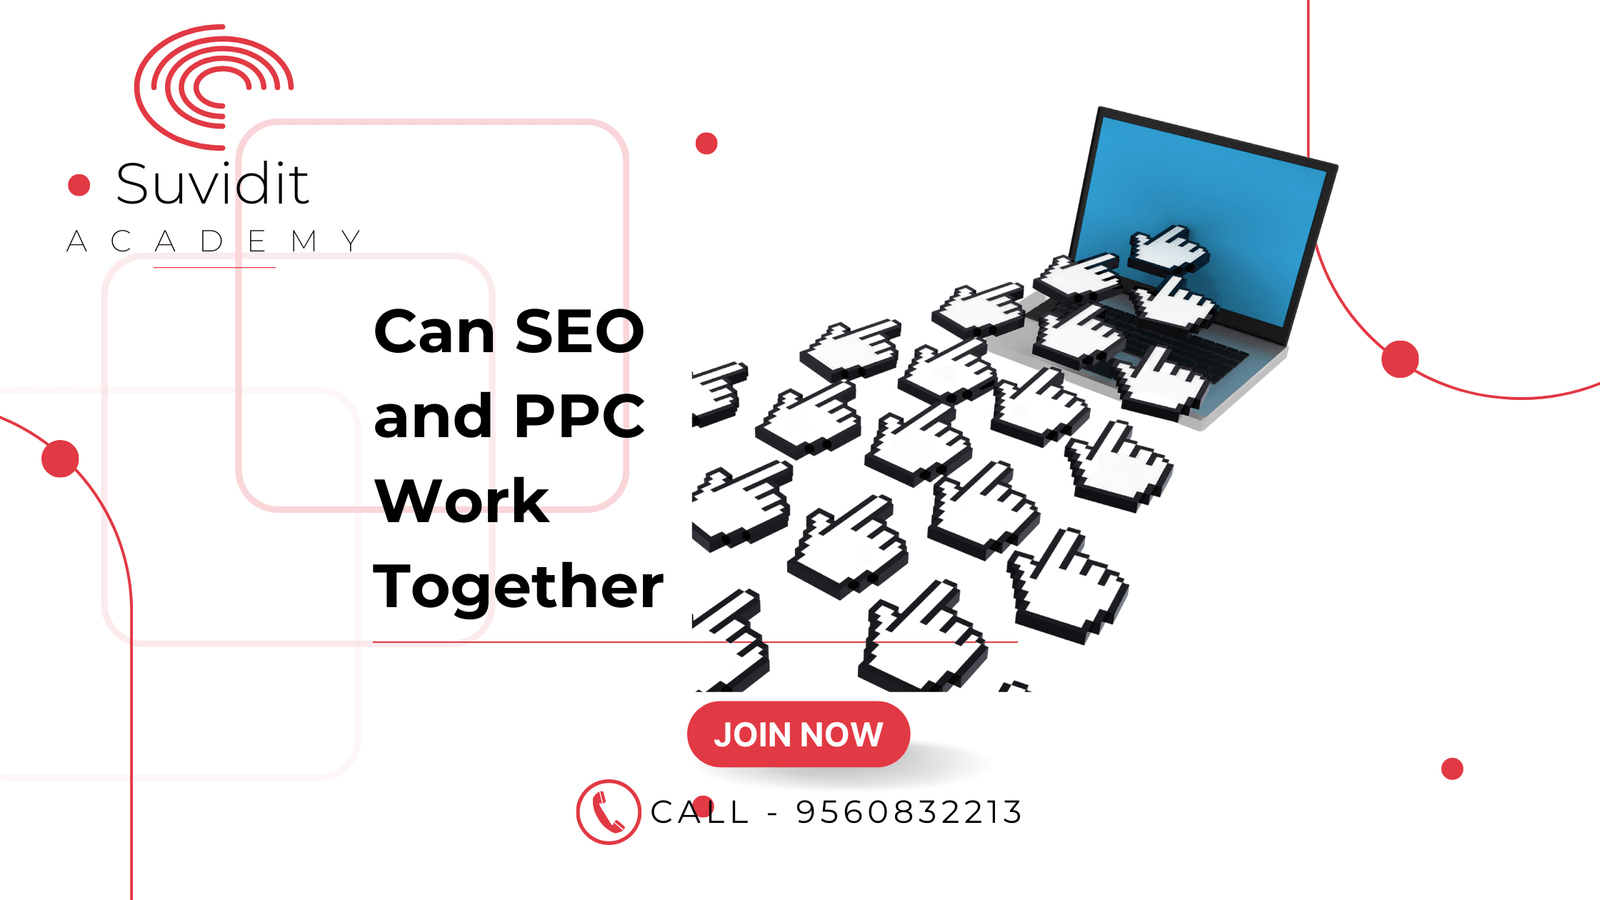 Can SEO and PPC Work Together?